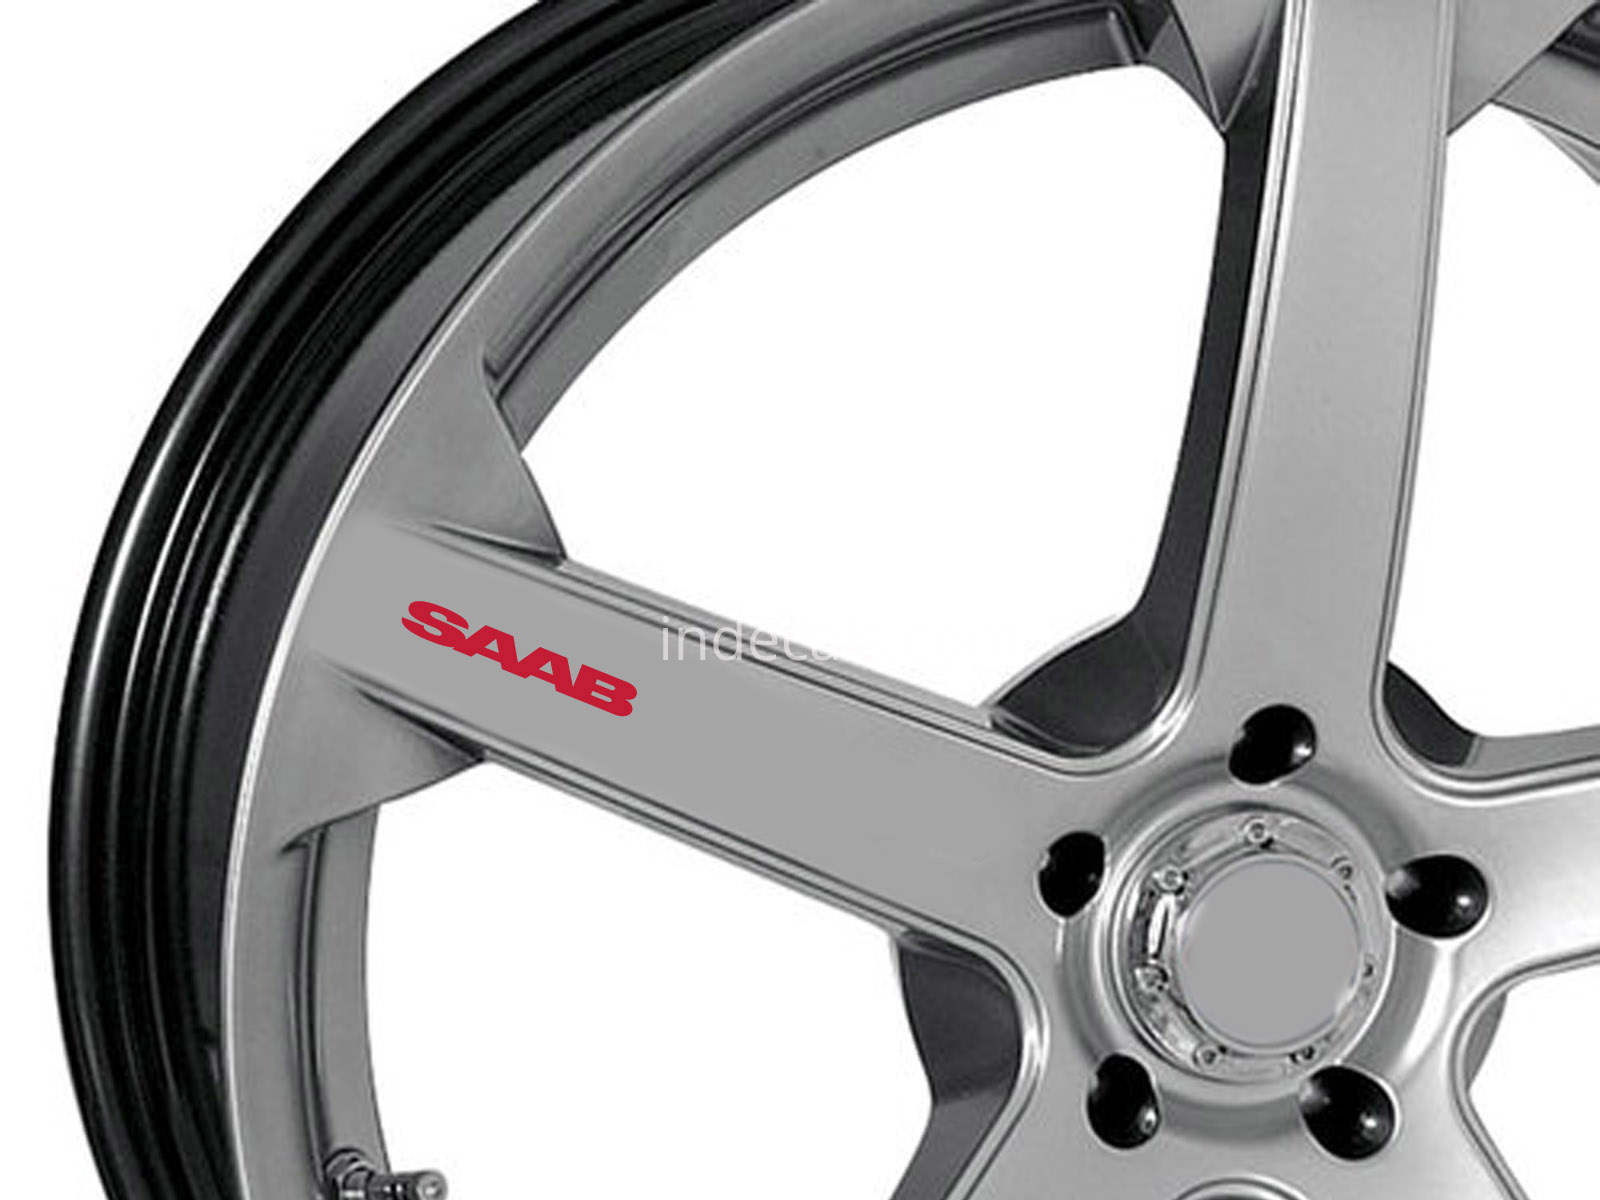 6 x Saab Stickers for Wheels - Red